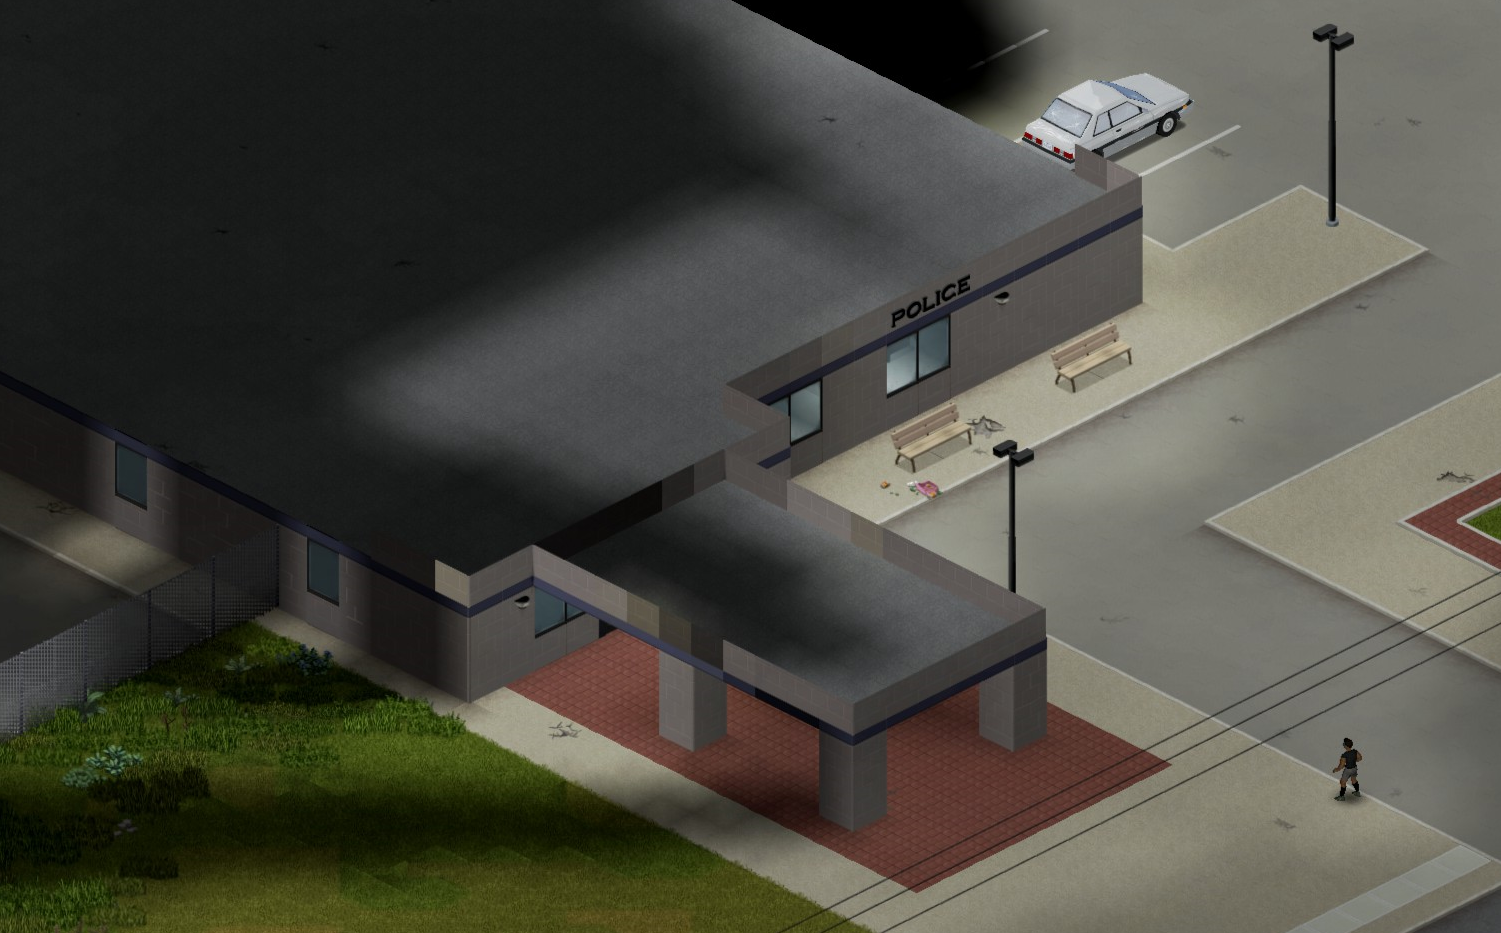 Project Zomboid - Tips How to Get Best Gear in Rosewood Guide - Step 1. Find the rosewood fire department and the rosewood police department - 09416C7